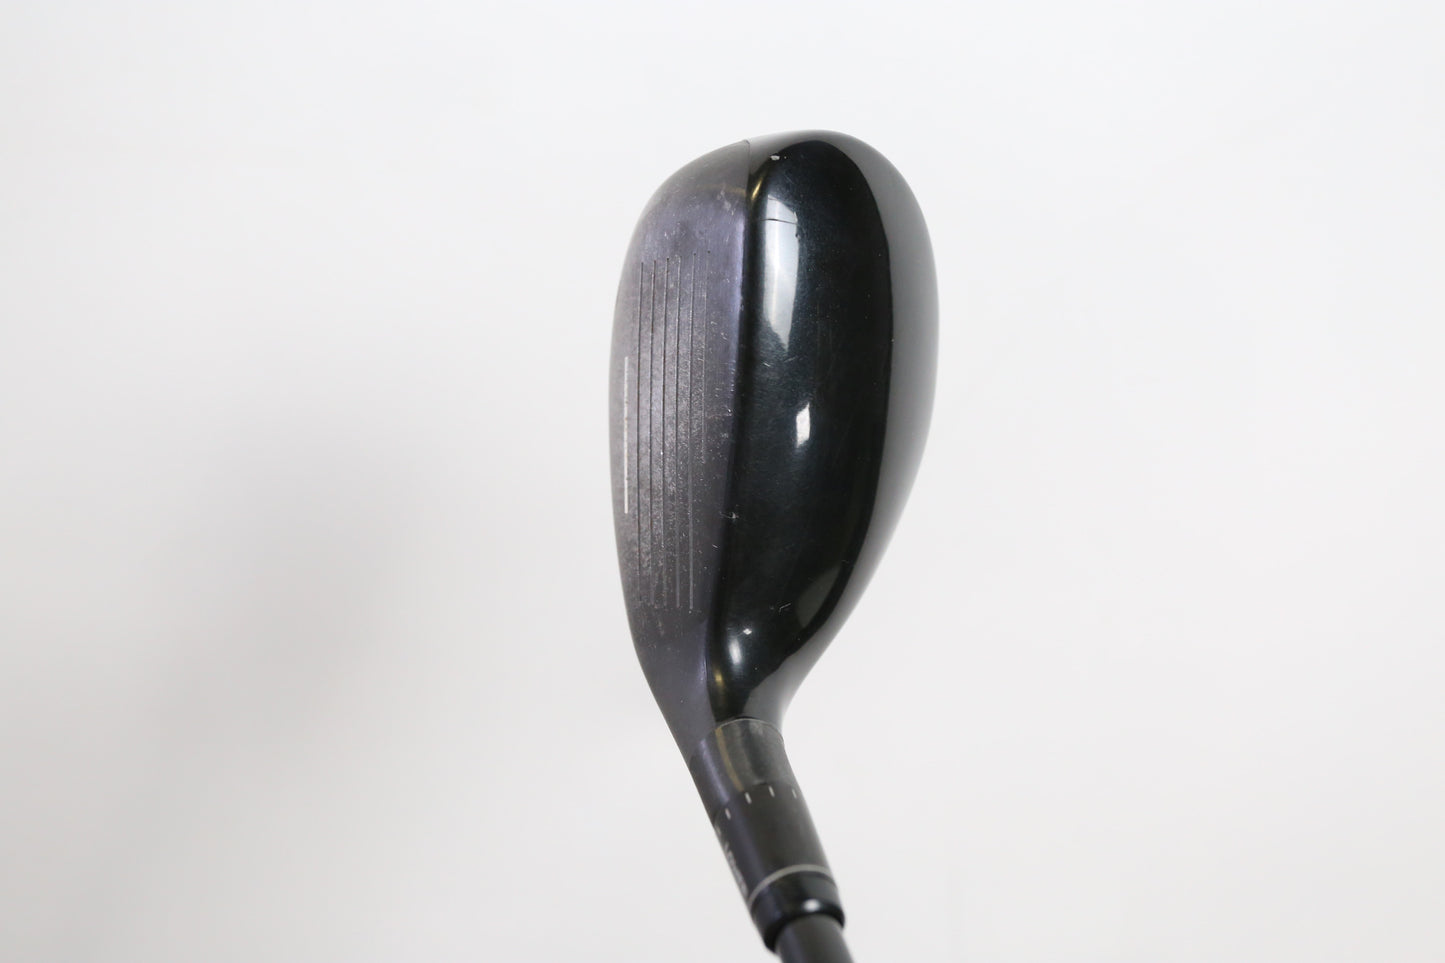 Used TaylorMade M1 Rescue 3H Hybrid - Right-Handed - 19 Degrees - Stiff Flex